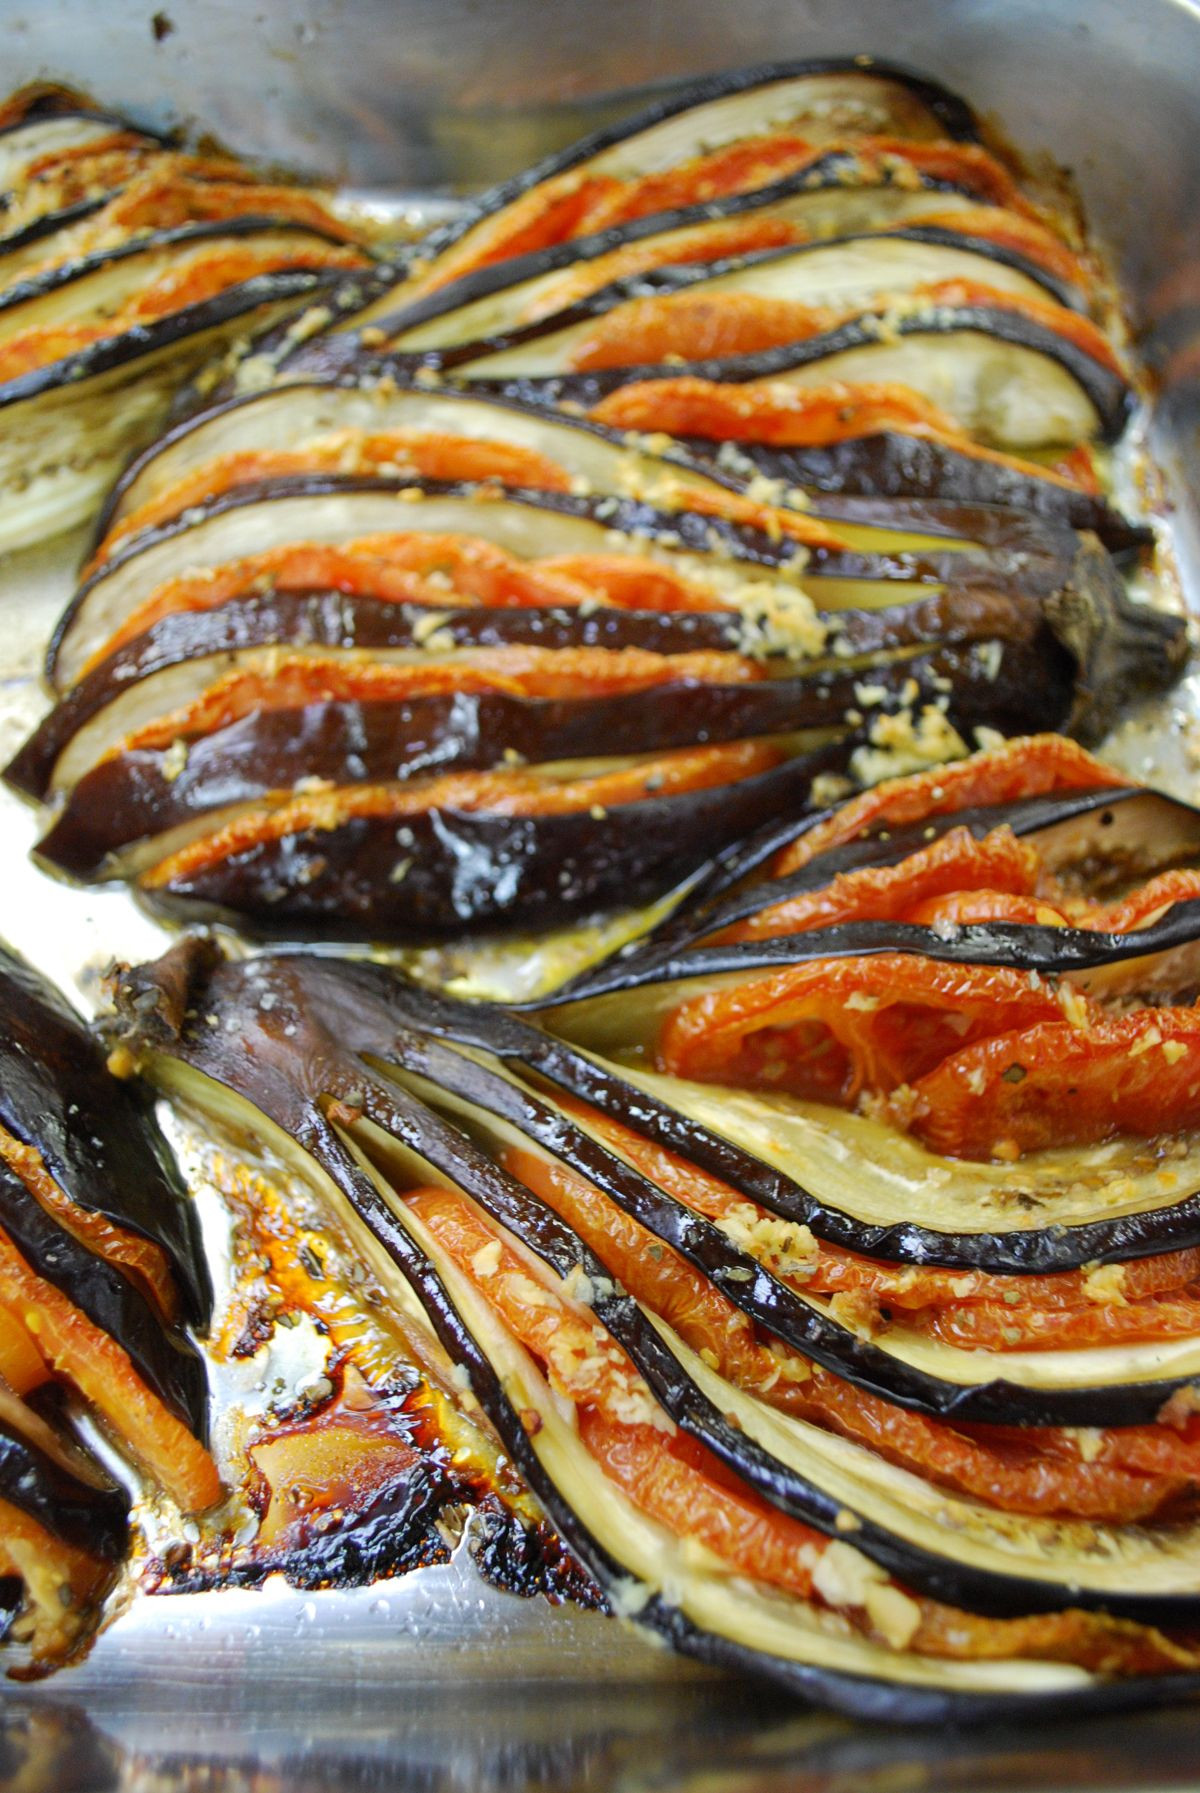 Gourmet Vegan Entree Recipes
 Eggplant Fans With images